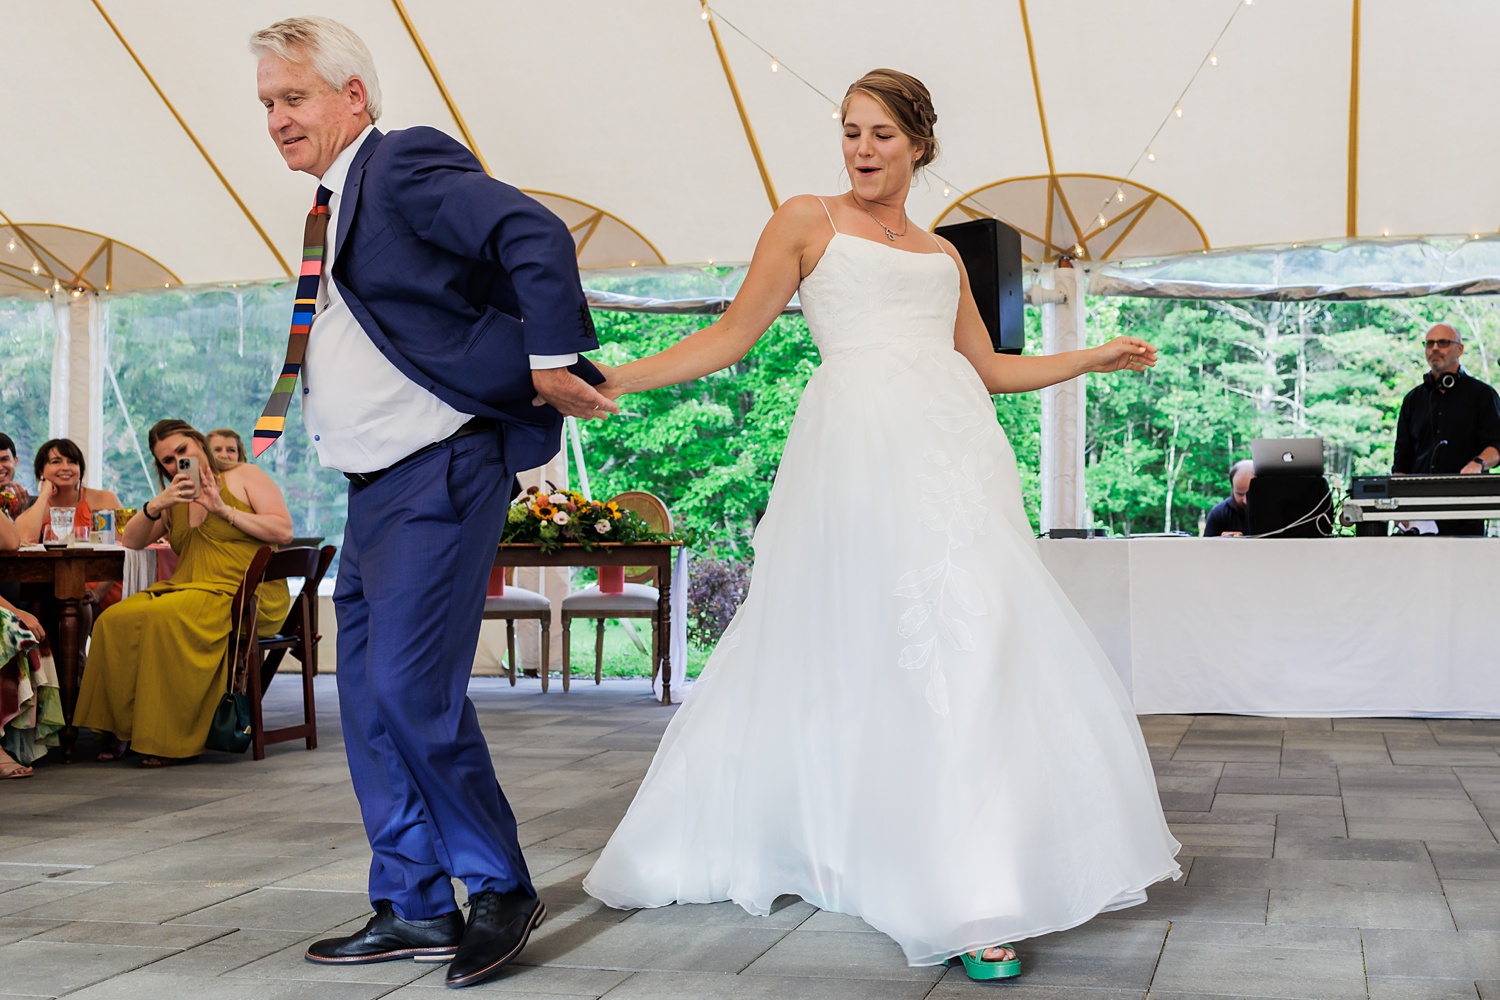 Dancing with dad at the wedding reception under the tent in New Hampshire